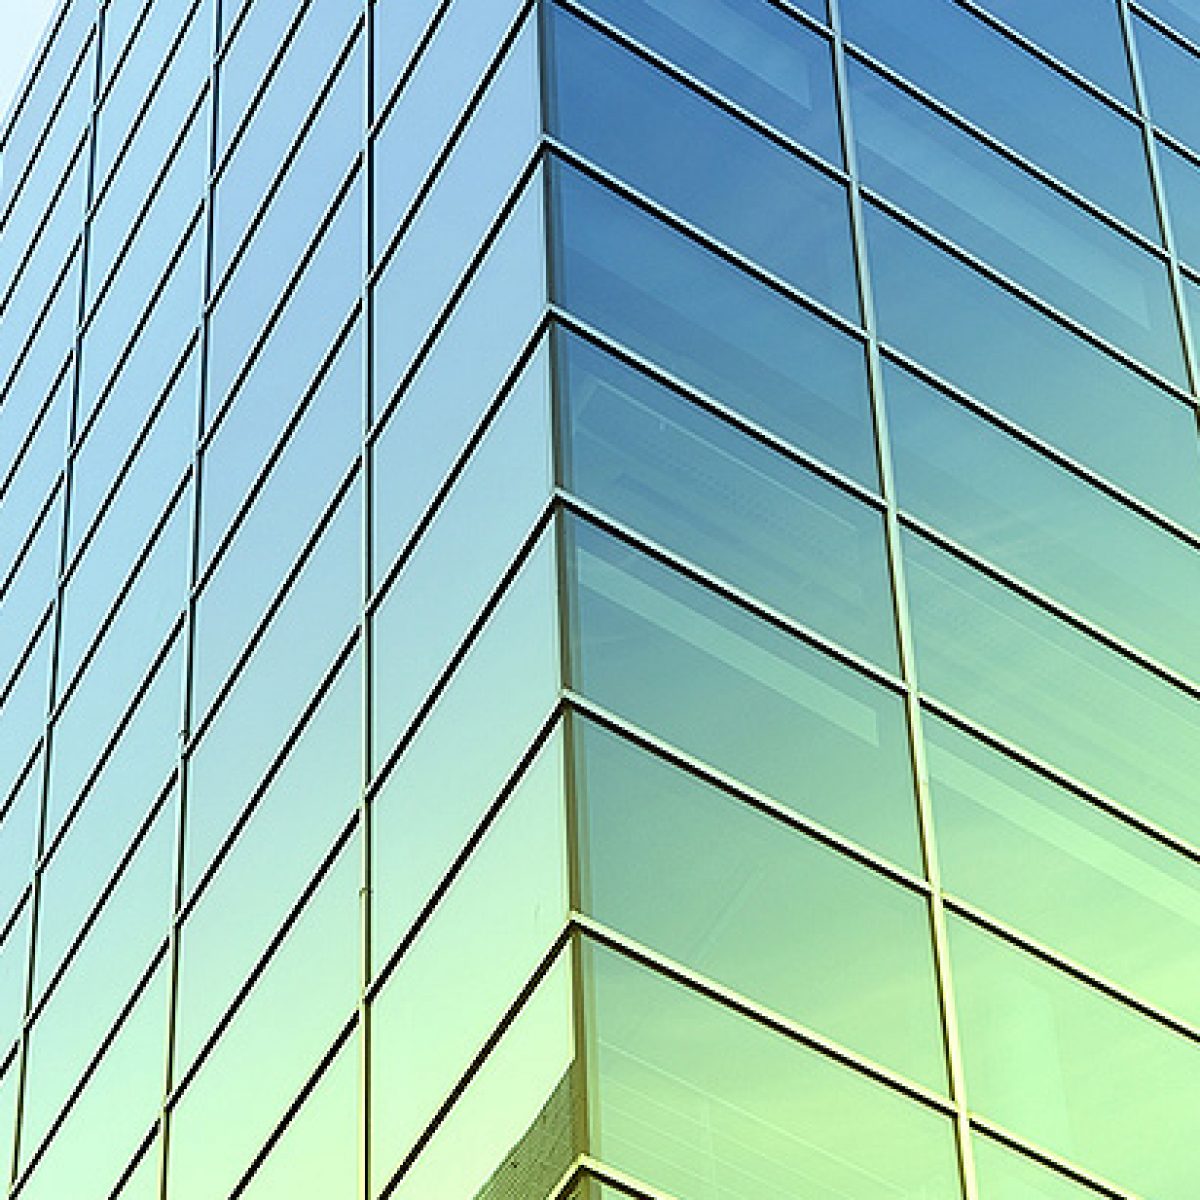 Covered Curtain Wall Systems